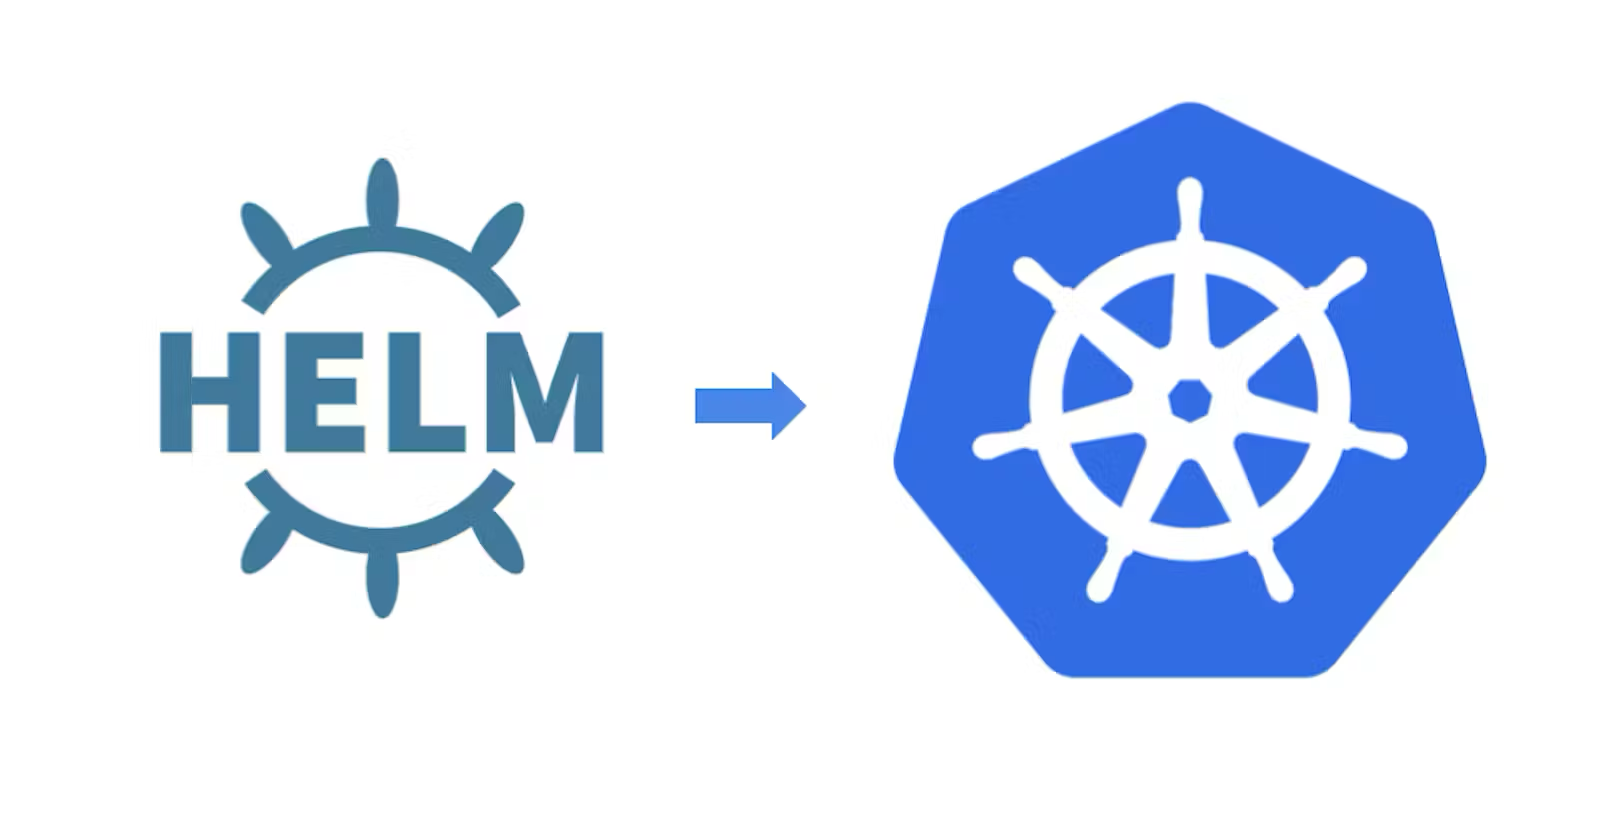 Helm - Package manager for Kubernetes